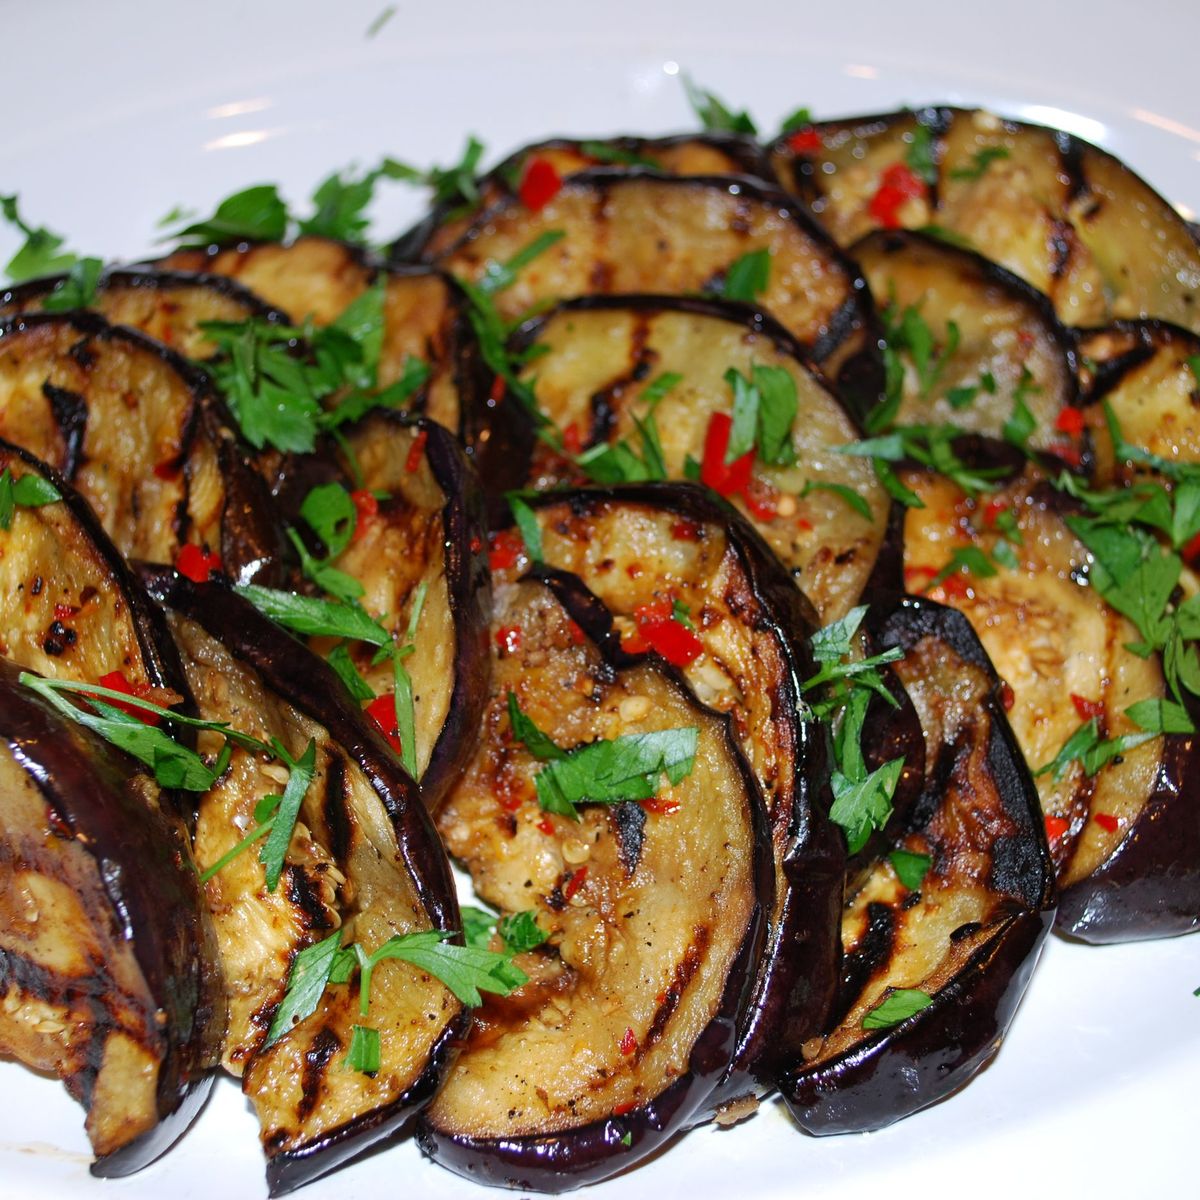 Easy Grilled Eggplant Recipe How To Marinate Grill Eggplant,Picture Of A Ratchet